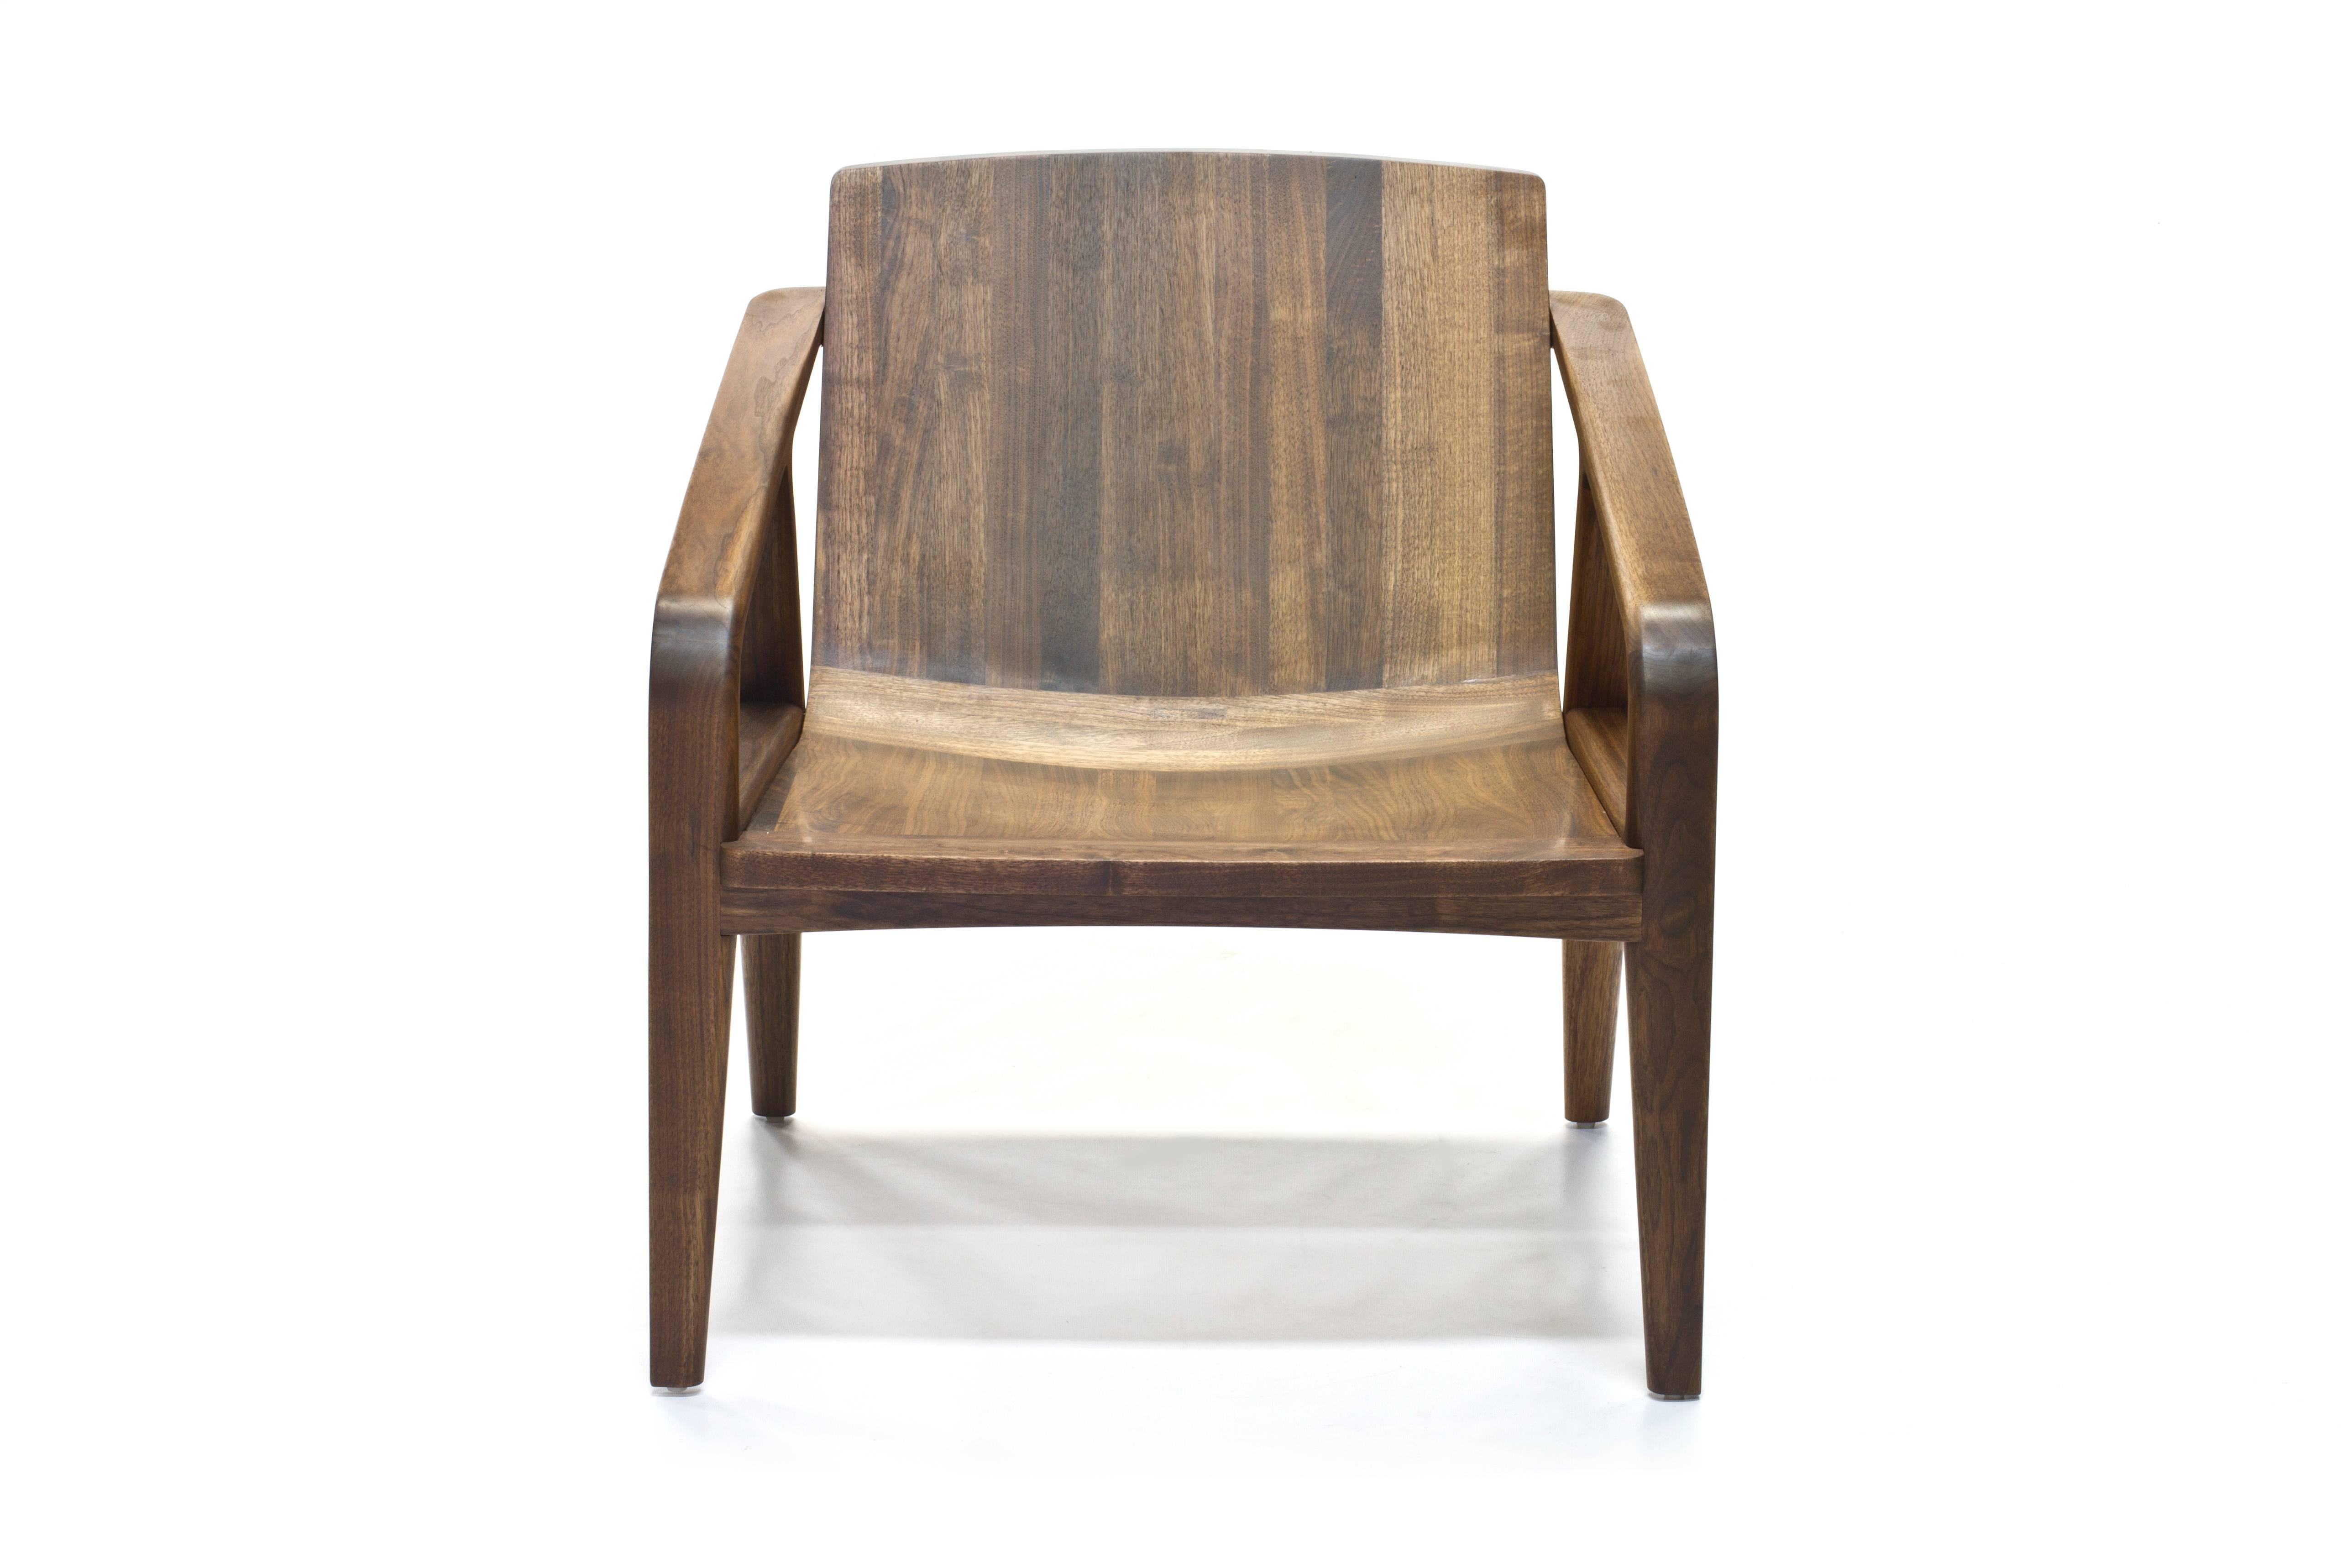 Drawing inspiration from the iconic “Captain’s Chair,” a fixture of his childhood summers on Cape Cod, Scott Mason’s next-generation design, the Pilot Lounge Chair for Wooda, combines 3D modeling and CNC wood shaping to create a modernist chair that